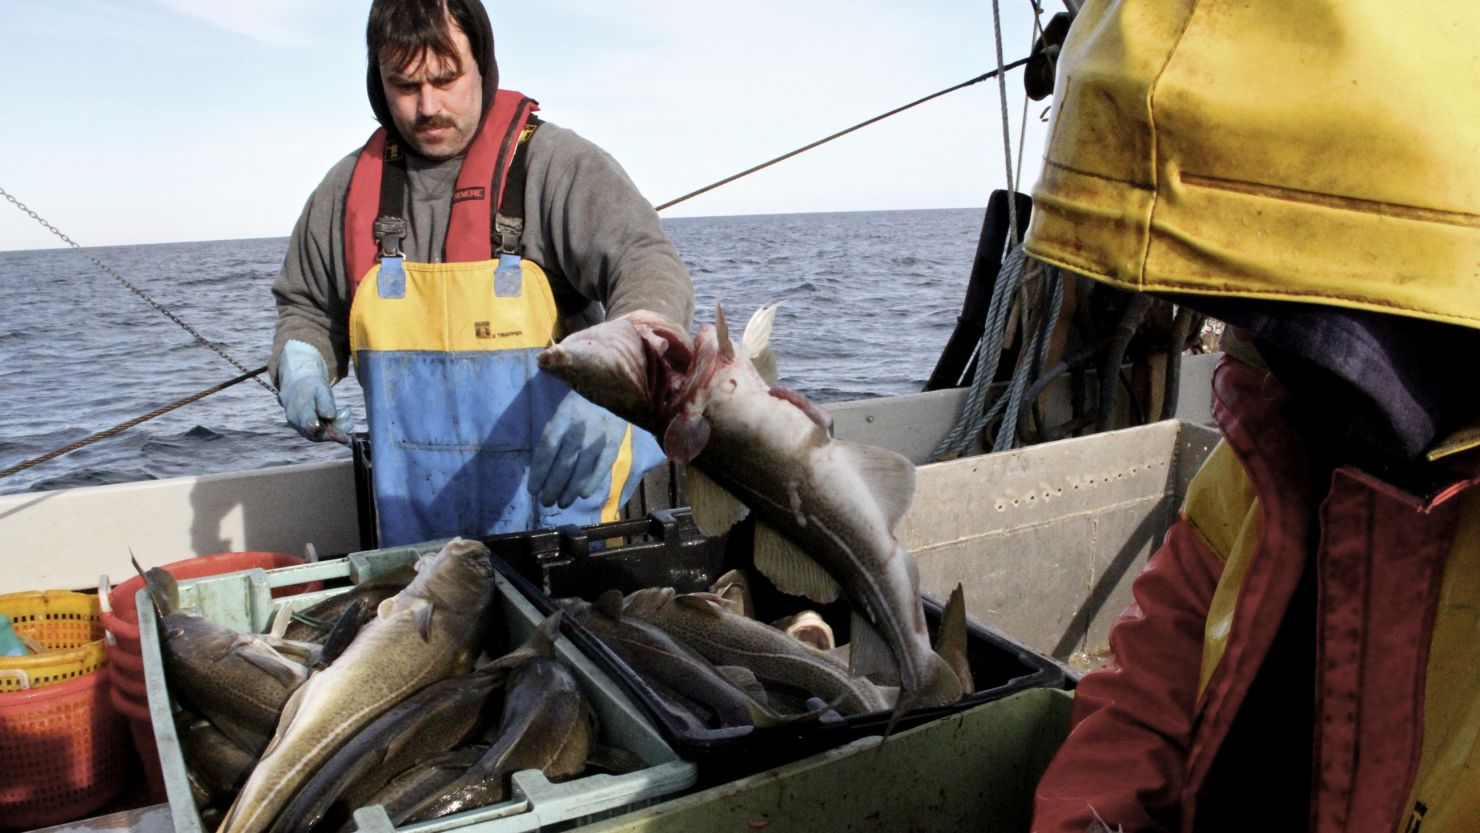 Historic cod fishing cuts threaten centuries-old industry in New England